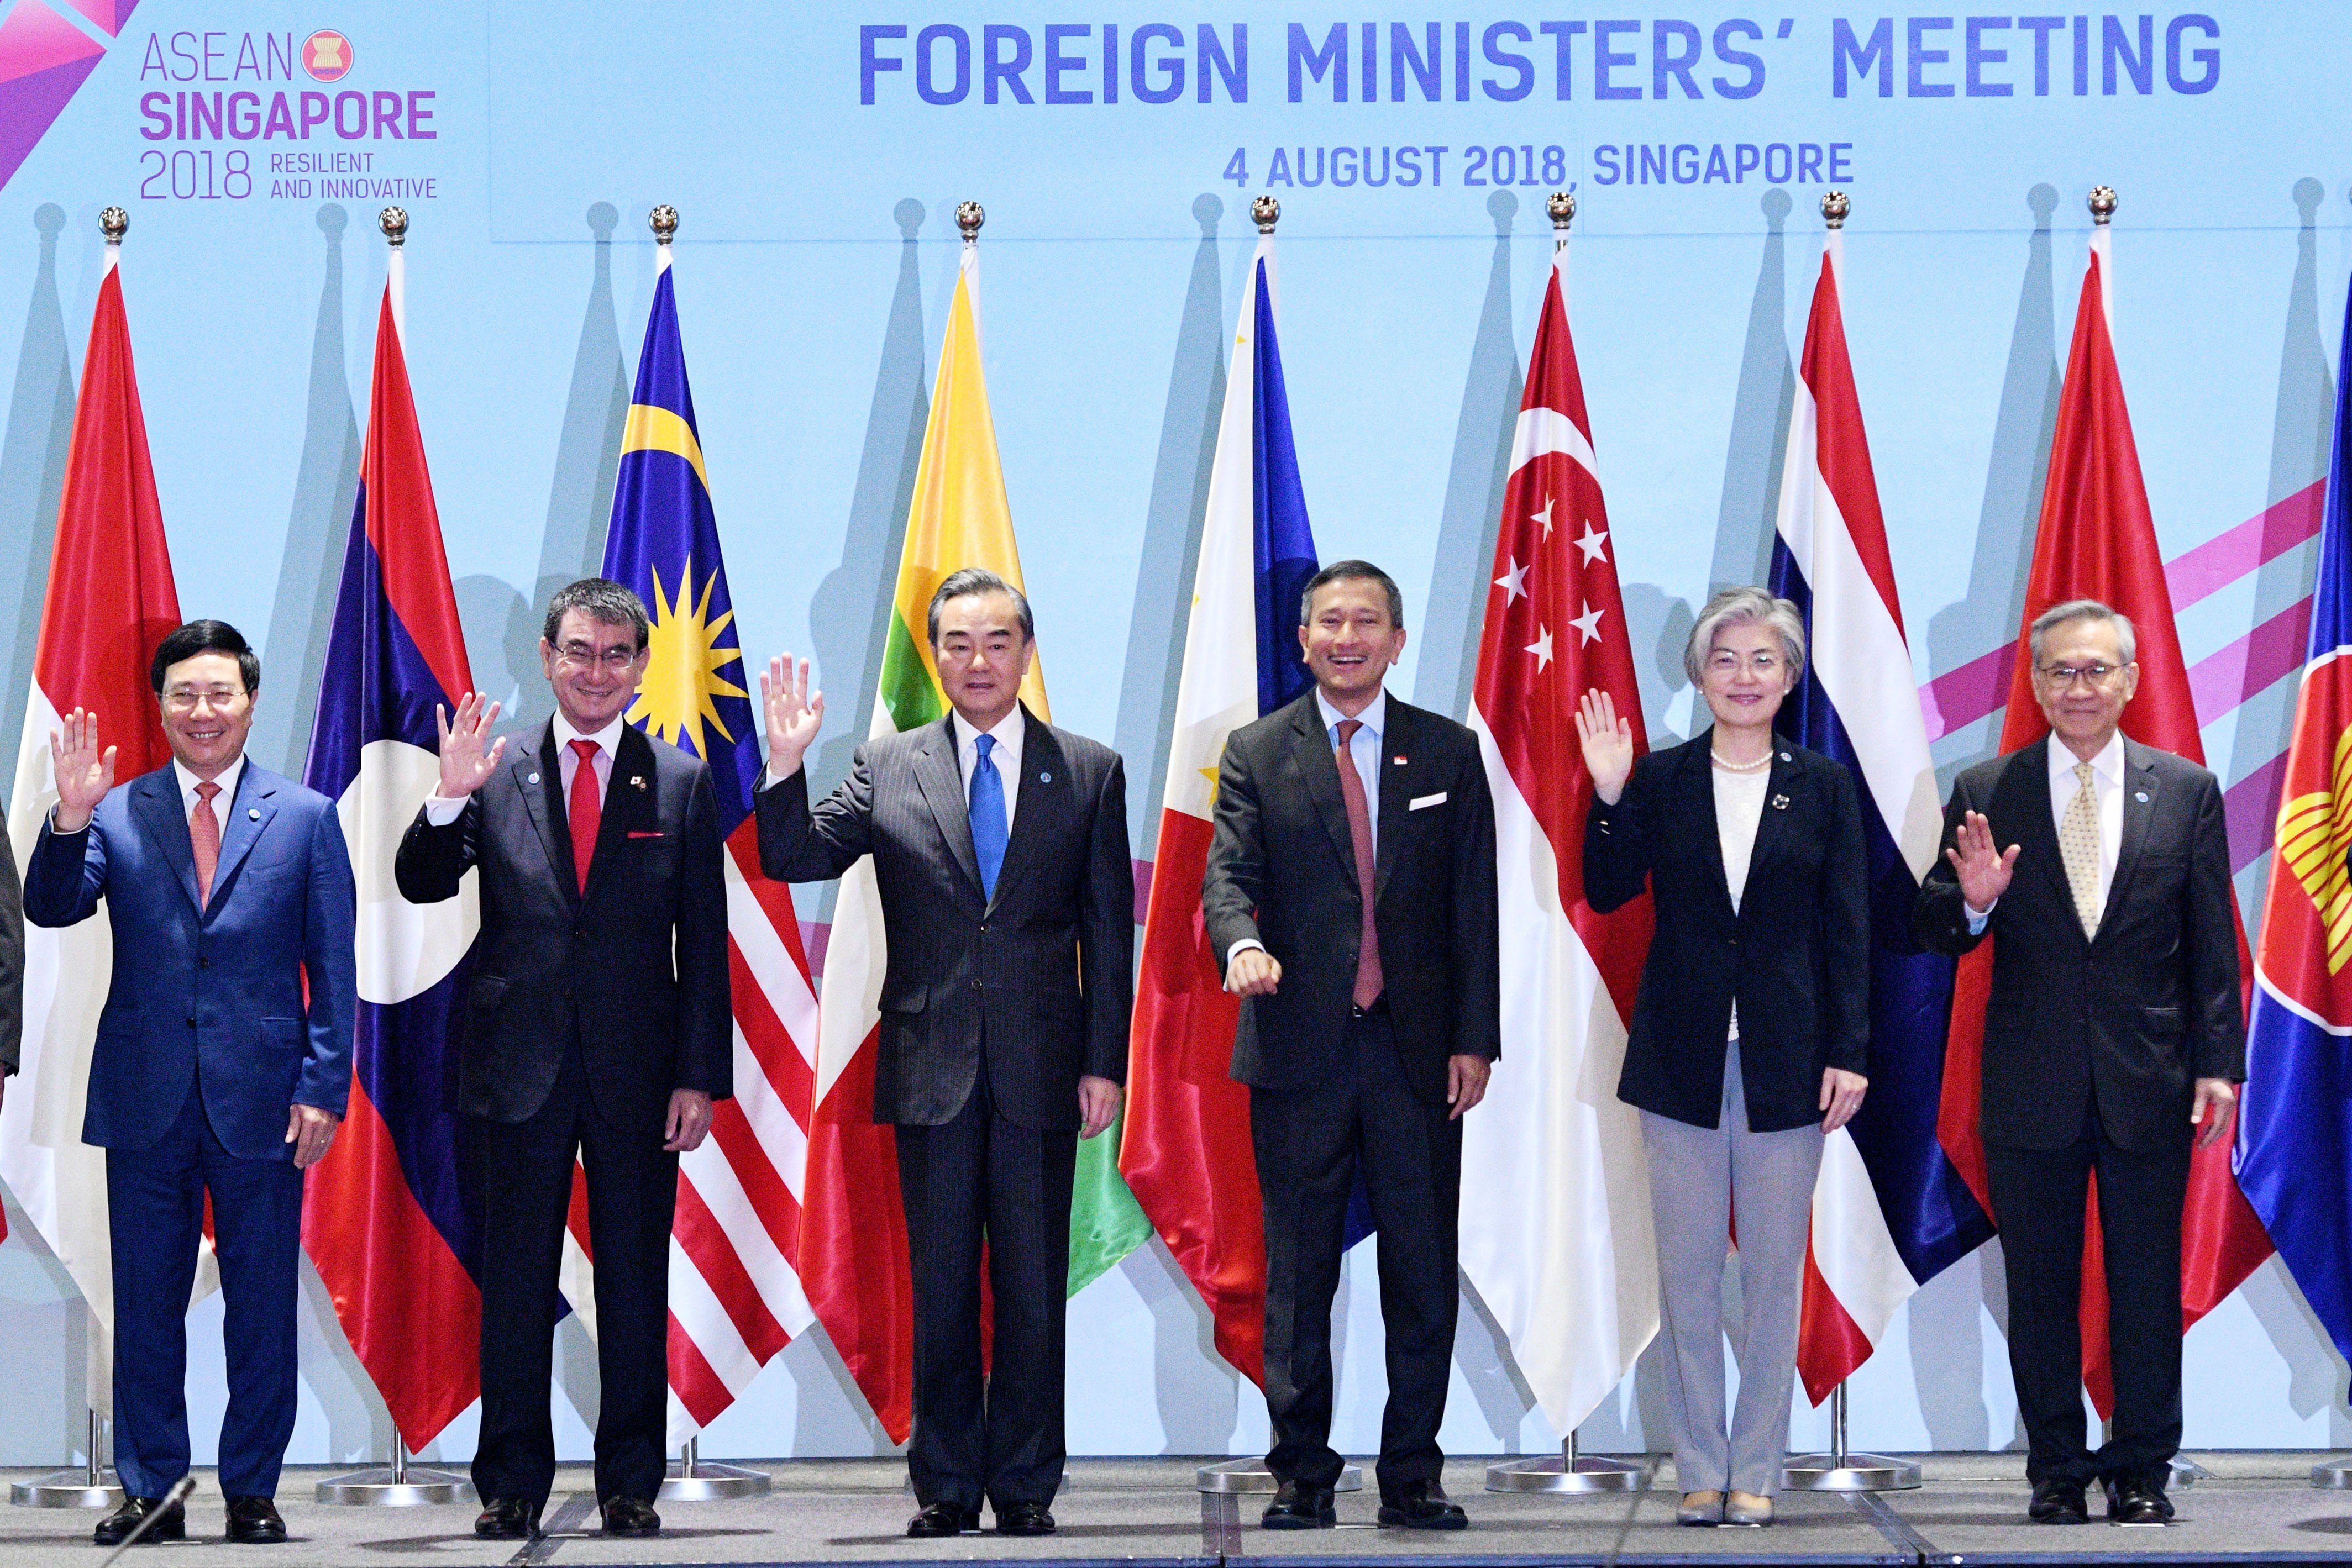 China’s Wang Yi (third from left) and other foreign ministers pose for a group photo during an Asean meeting on August 4 in Singapore. Photo: Xinhua